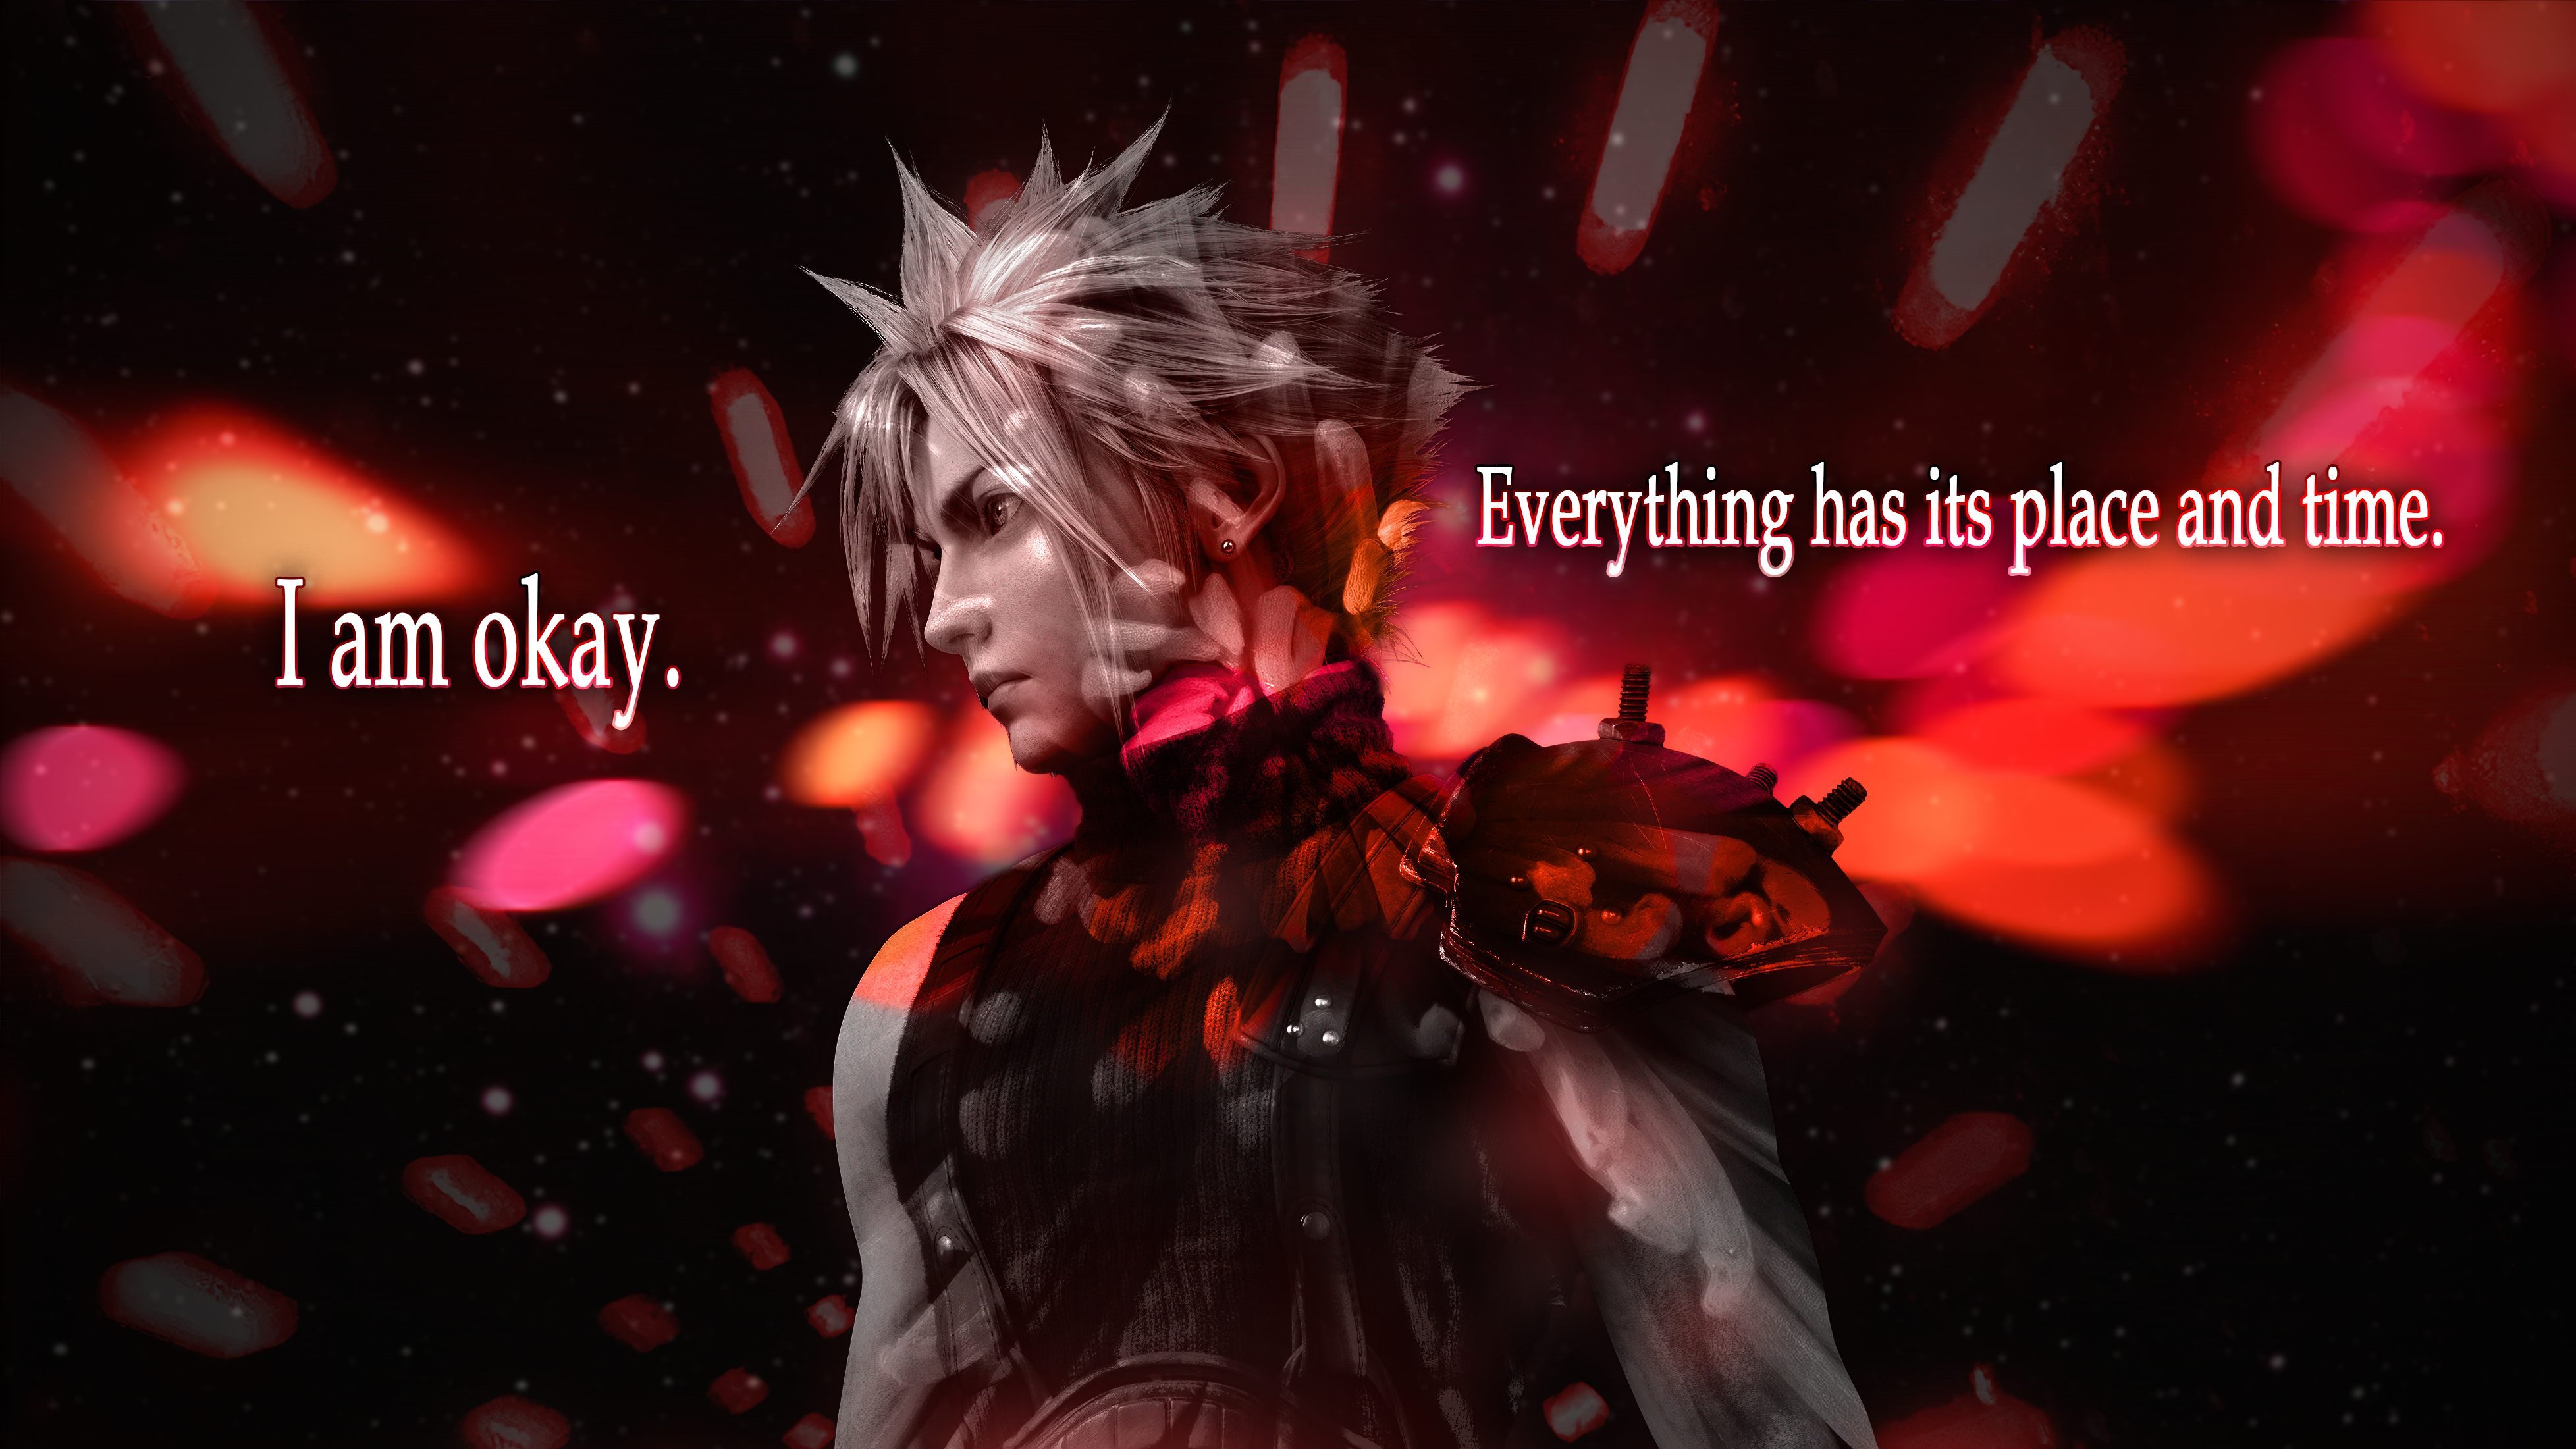 Cloud Strife Final Fantasy Vii Positive Red Abstract Photoshopped Video Game Characters 3912x2201